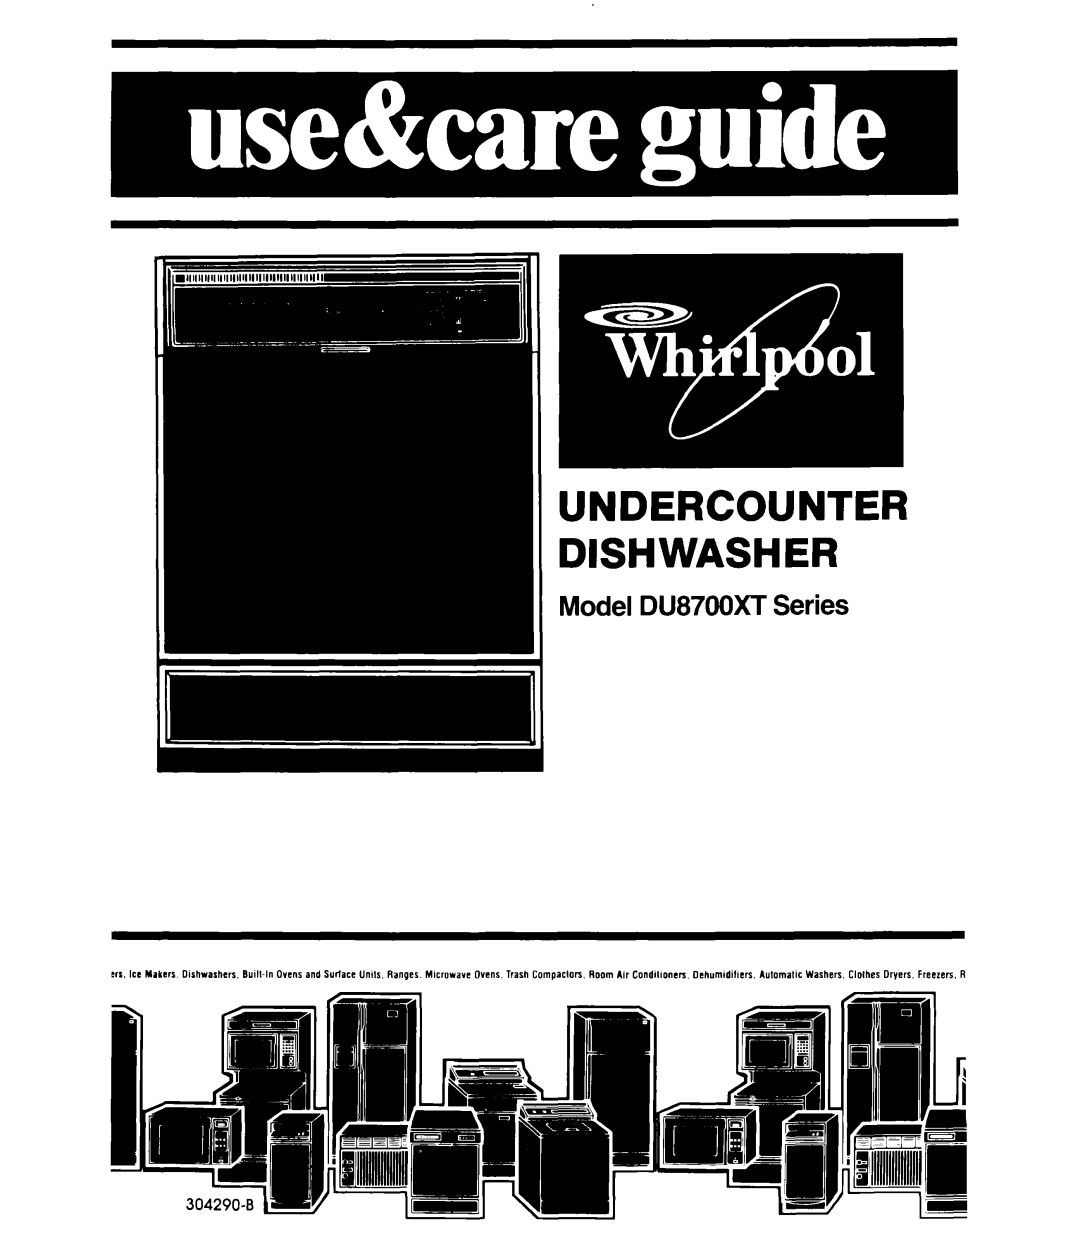 Whirlpool manual Undercounter Dishwasher, Model DU87OOXTSeries, crs. ICC Makers, Dishwashers 